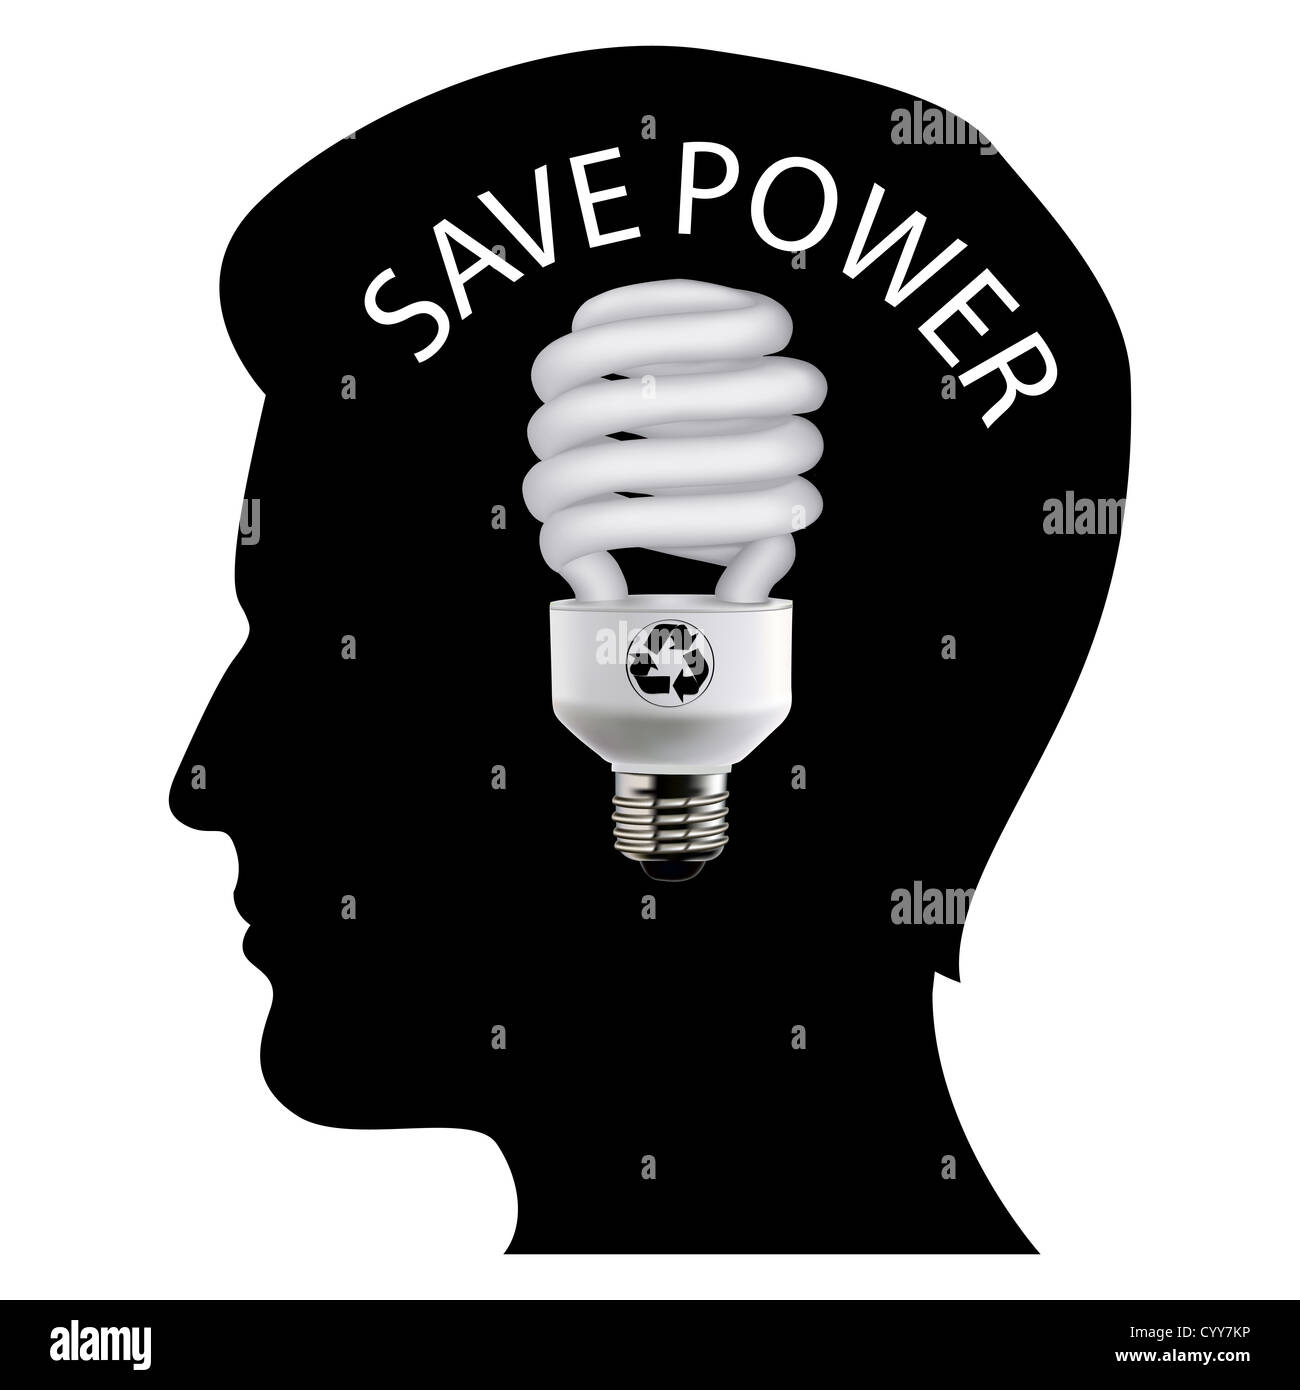 illustration of save power with man's mind on white background Stock Photo